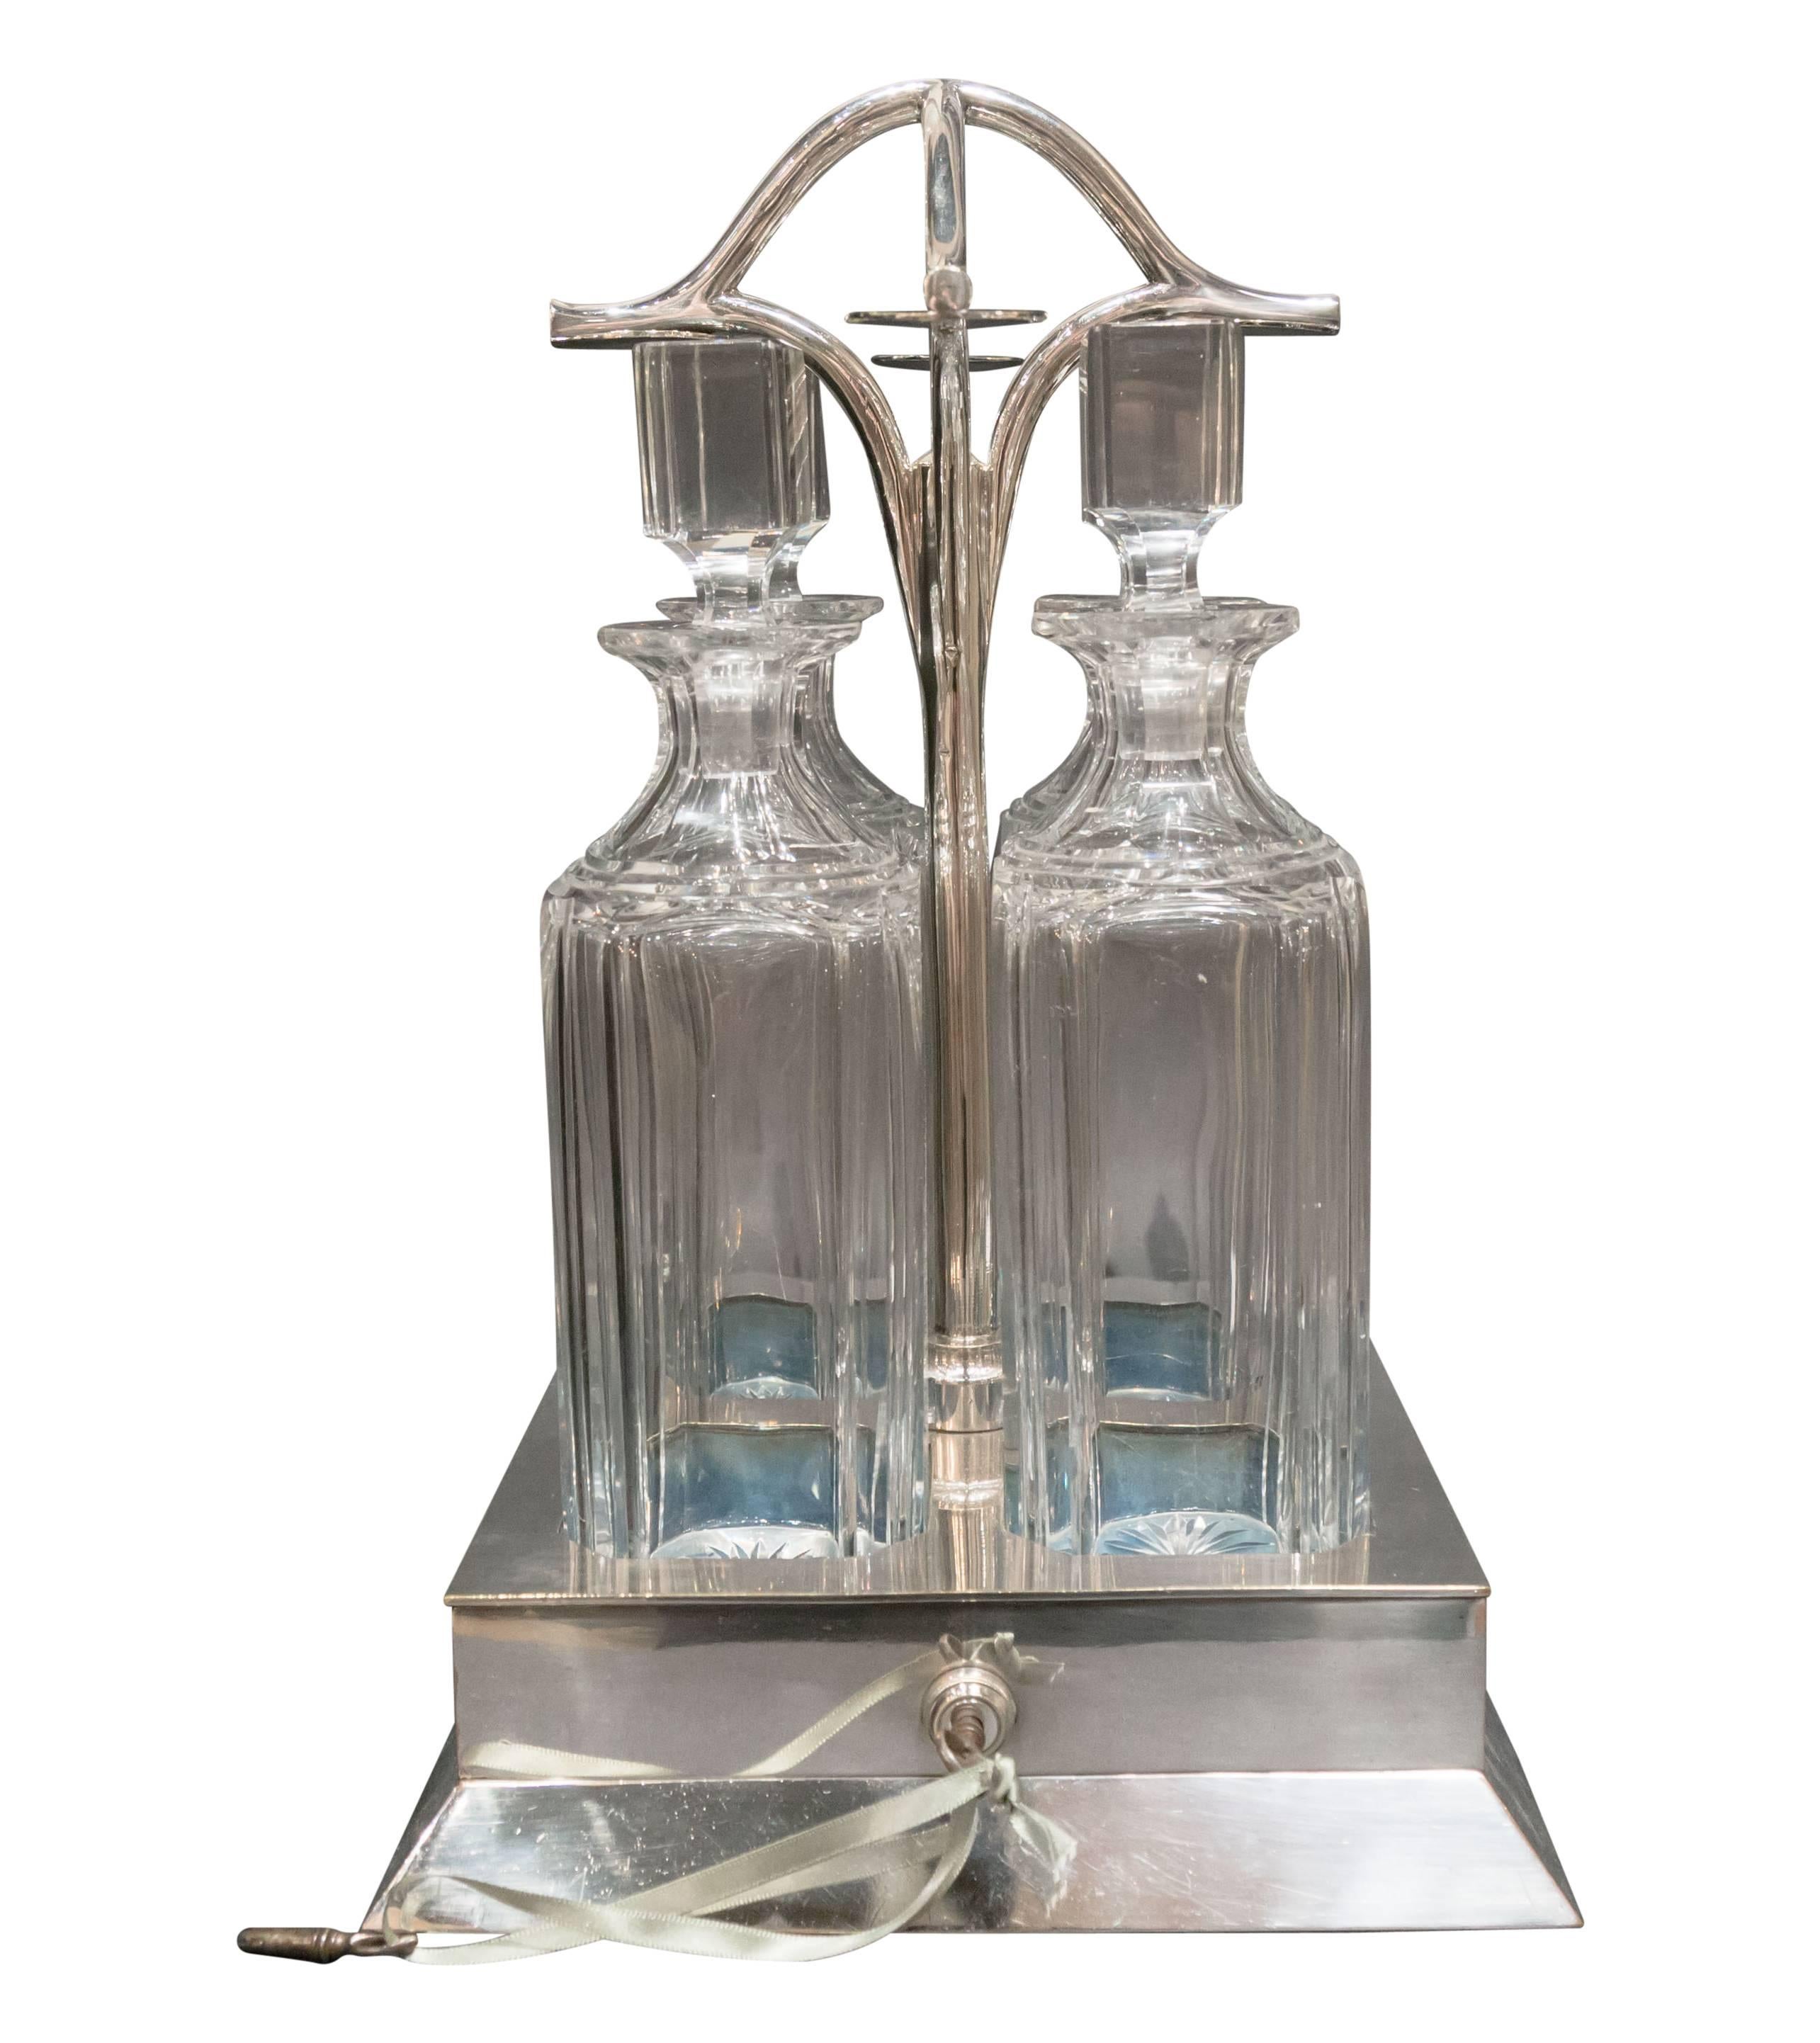 British Four Bottle Locking Tanalus with Silver Plate, circa 1890